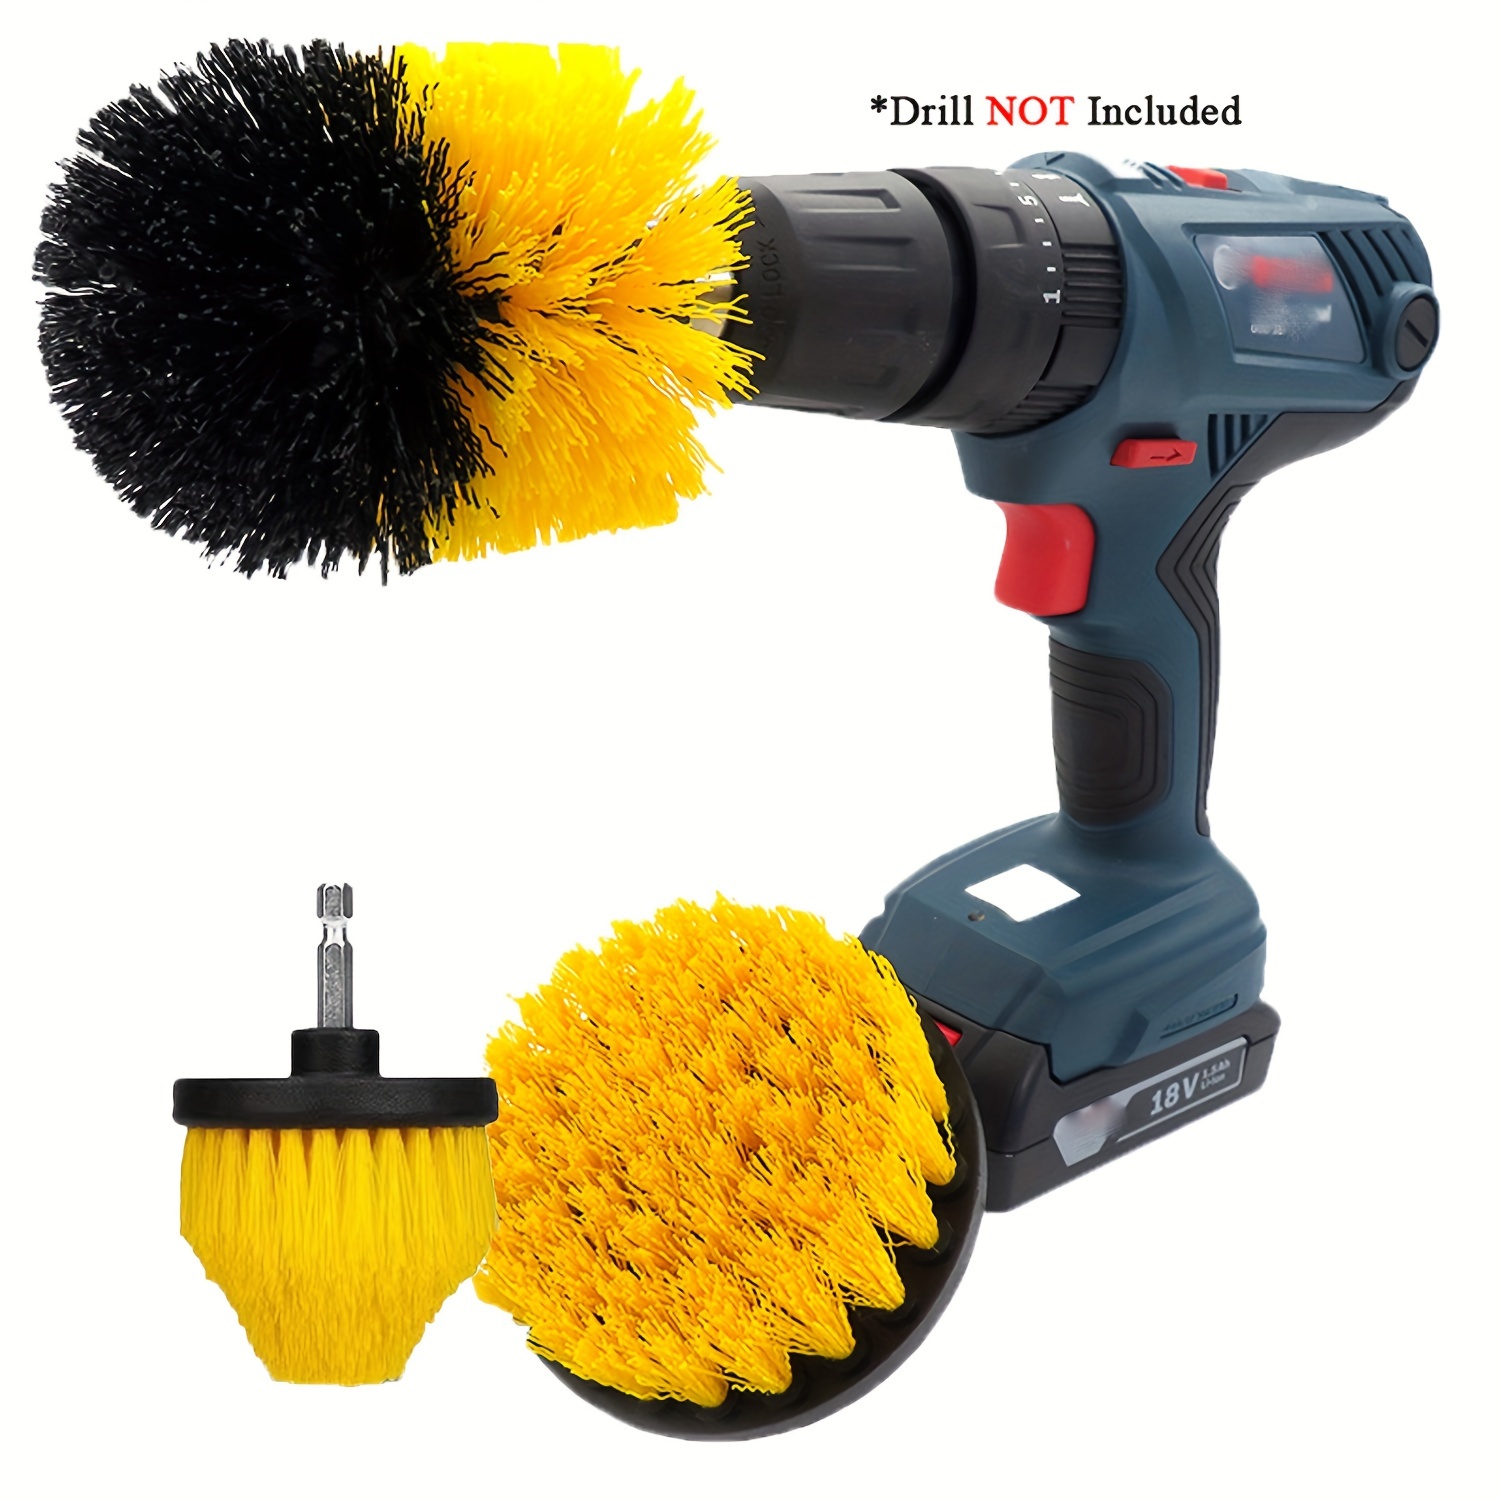 3Pcs/Set Electric Drill Brush Kit Power Scrubber Brush Attachments Set  Scrub Wash Brushes Tools for Car Floor Glass Tires Toilet Cleaning,Drill  Not Include